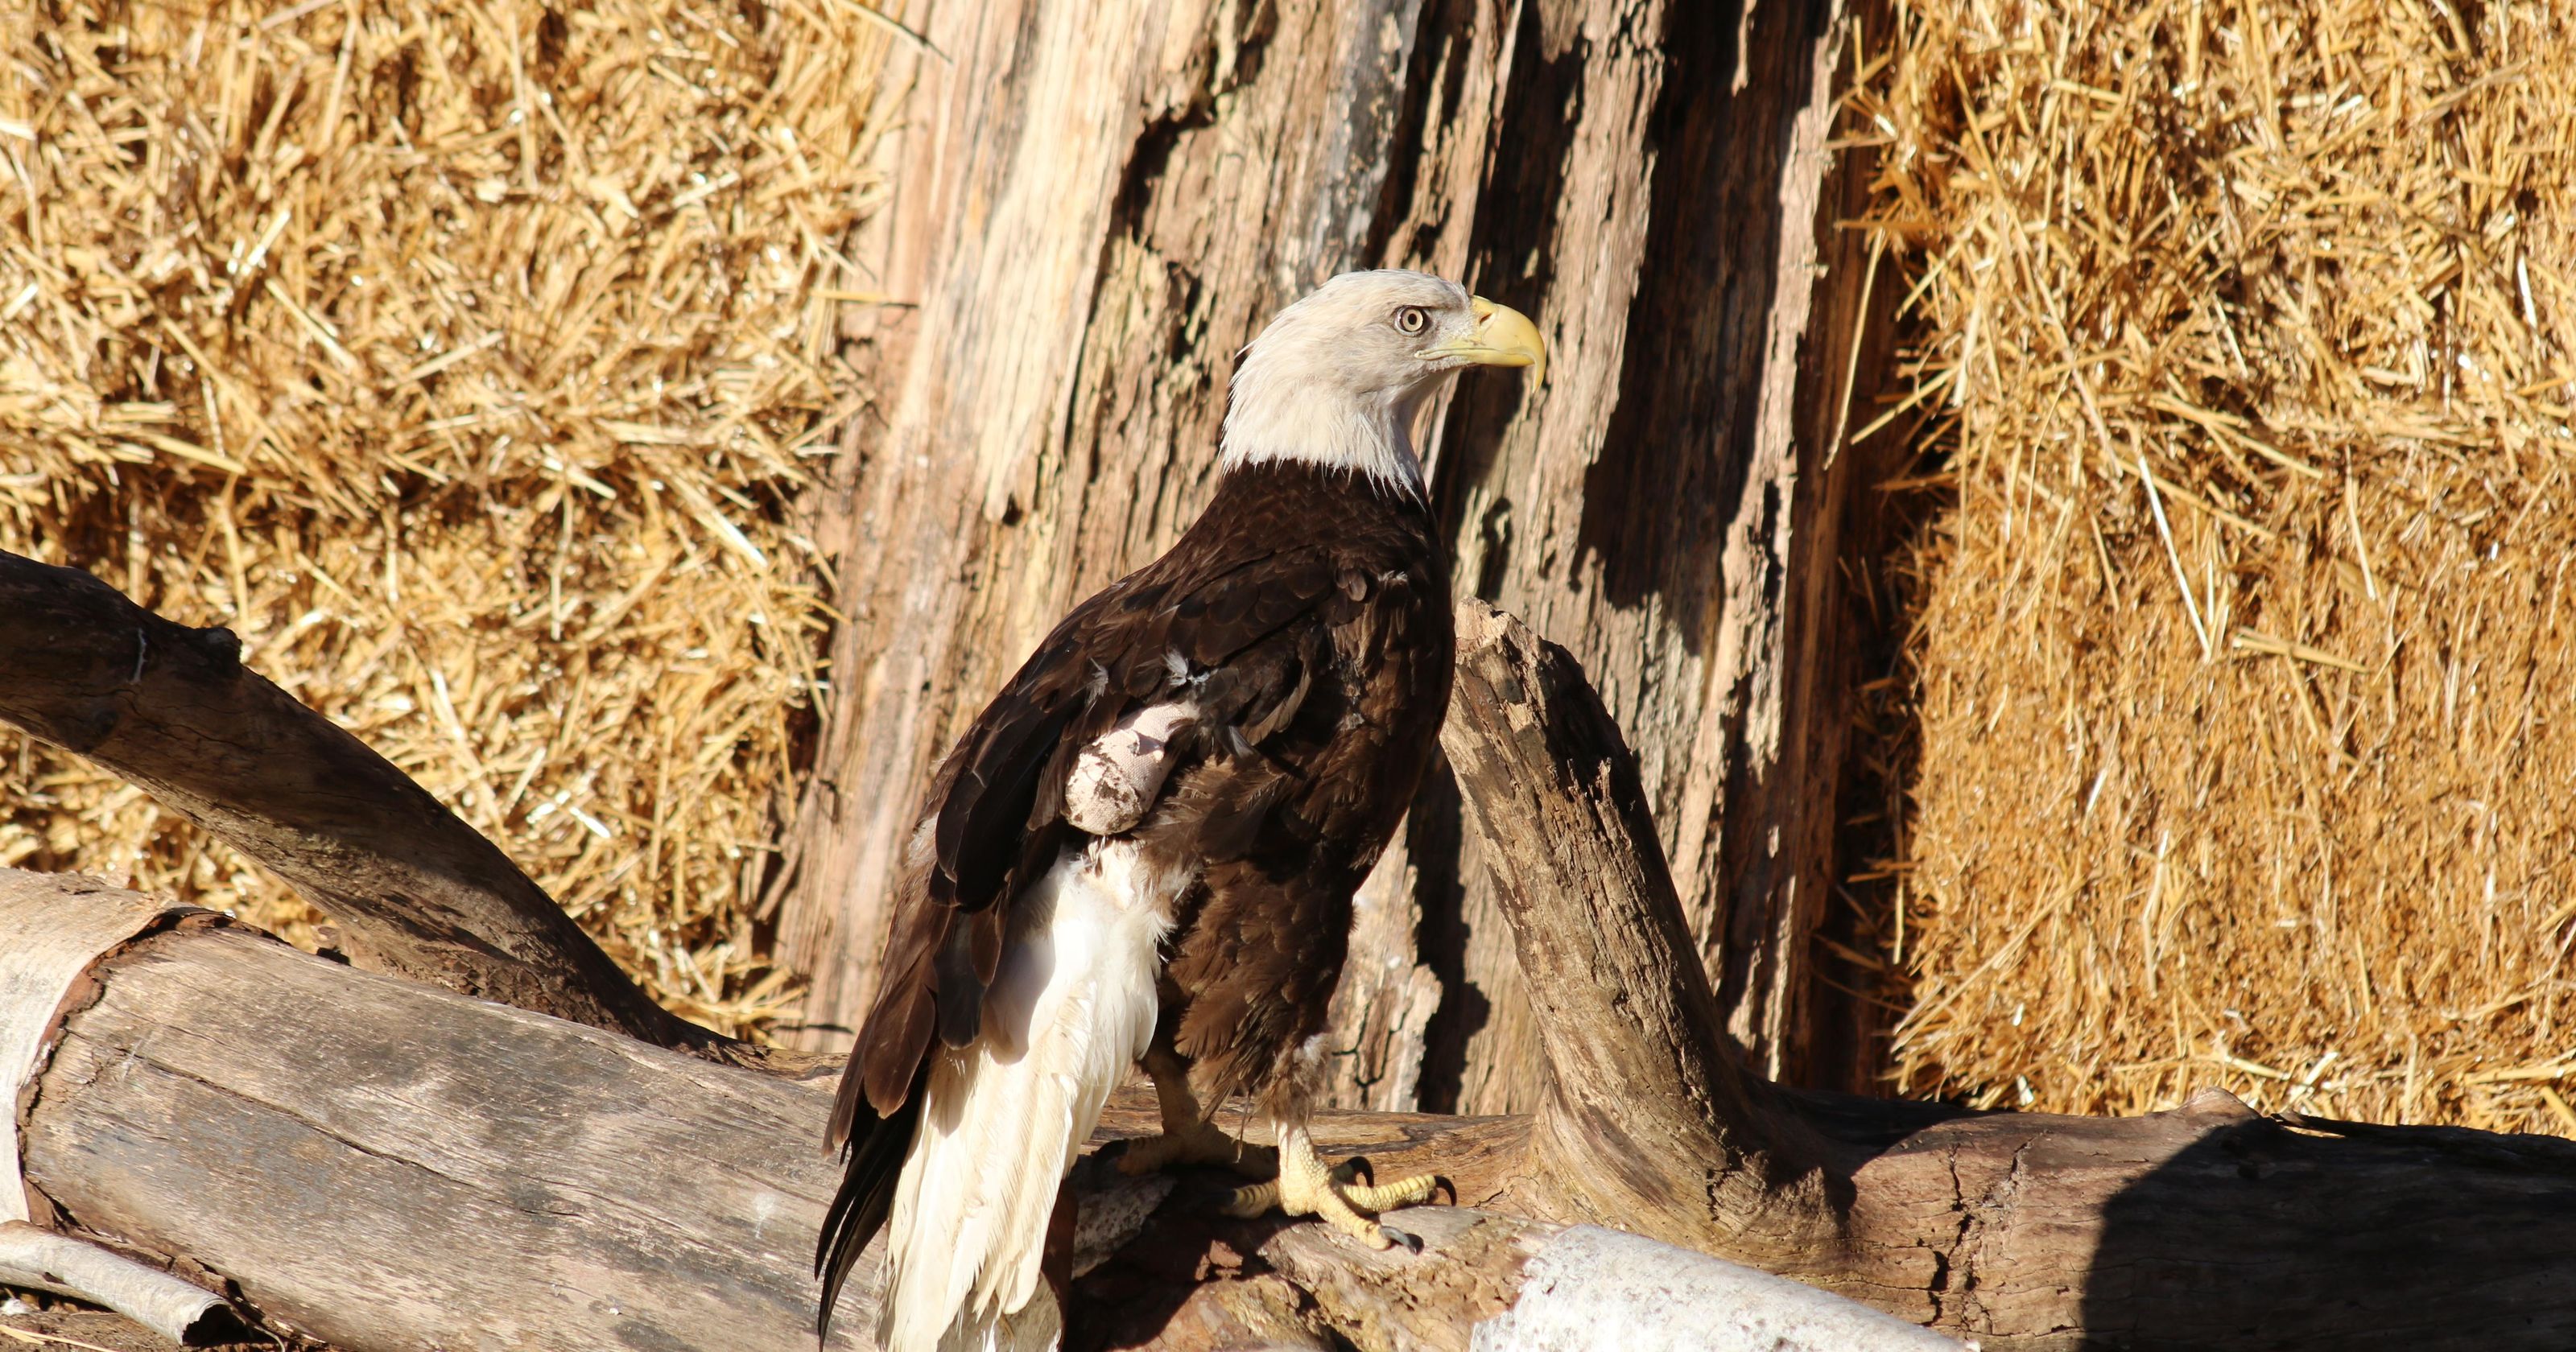 Rescued eagle, Mr. America, finds home at Detroit Zoo